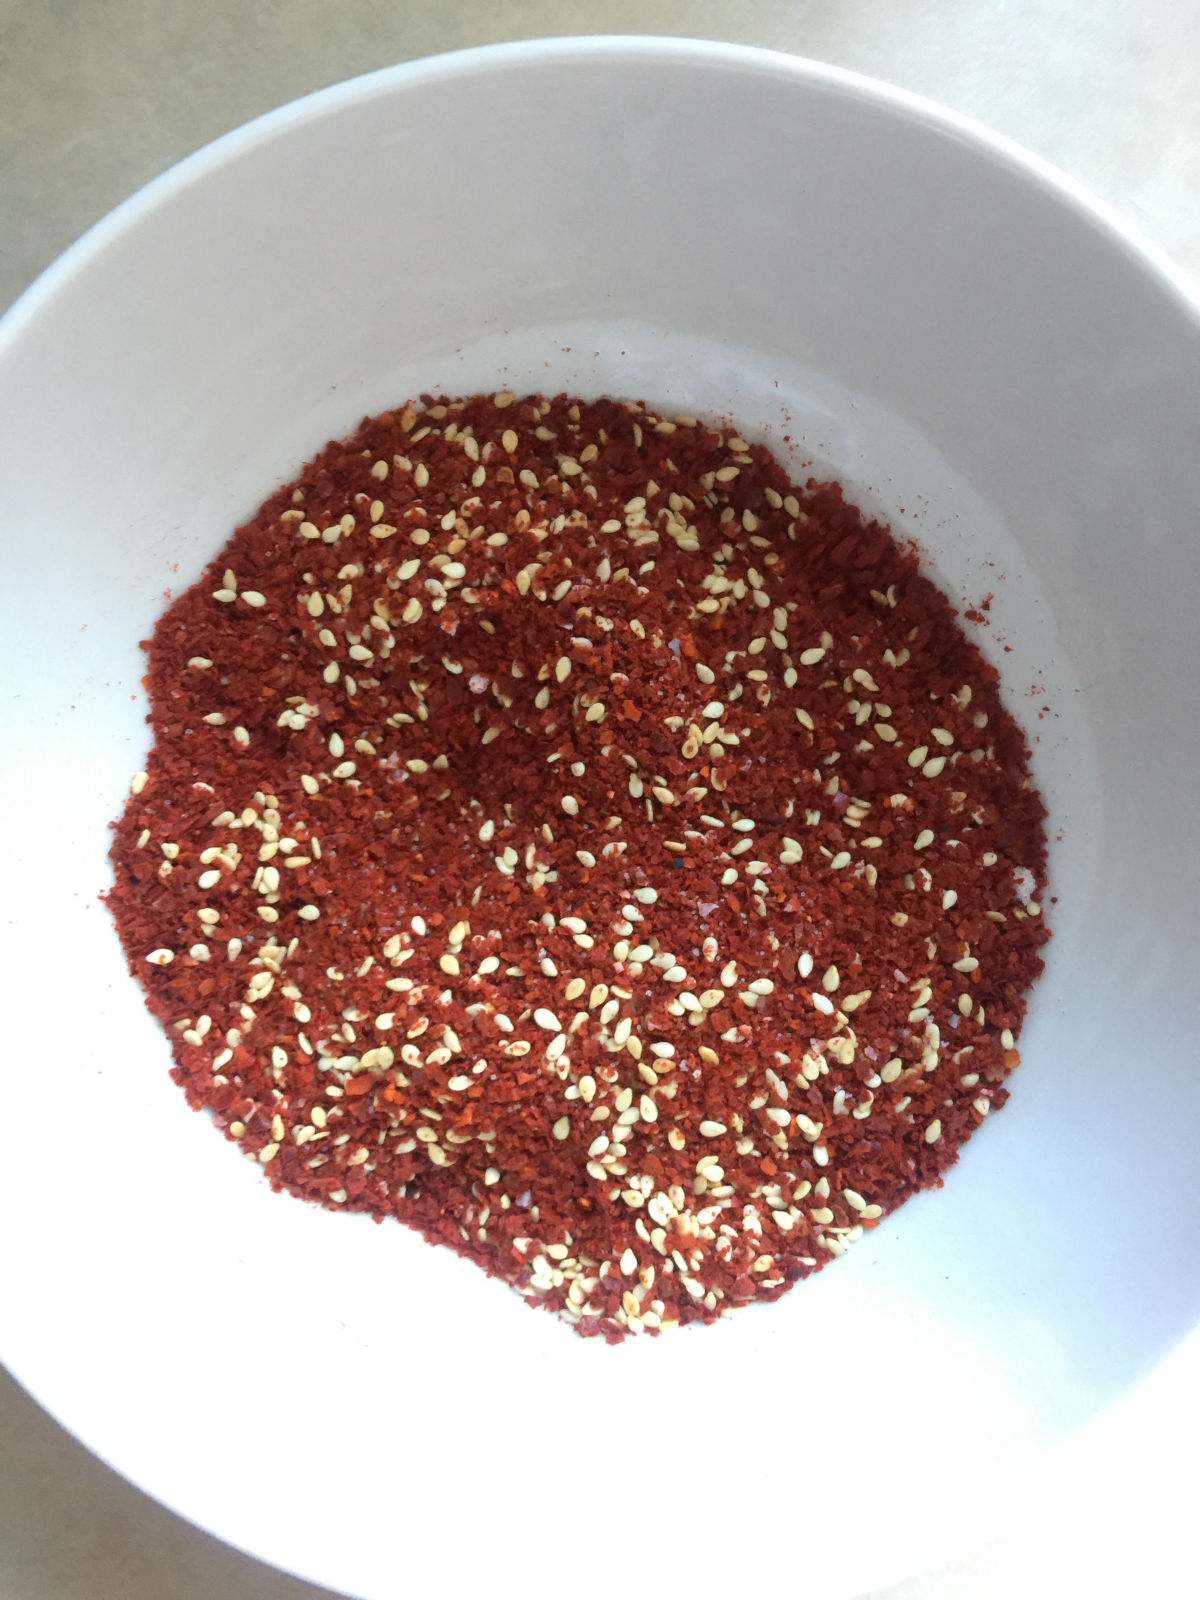 Overhead view of salt, sesame seeds and ground chili mixed together in a white bowl.